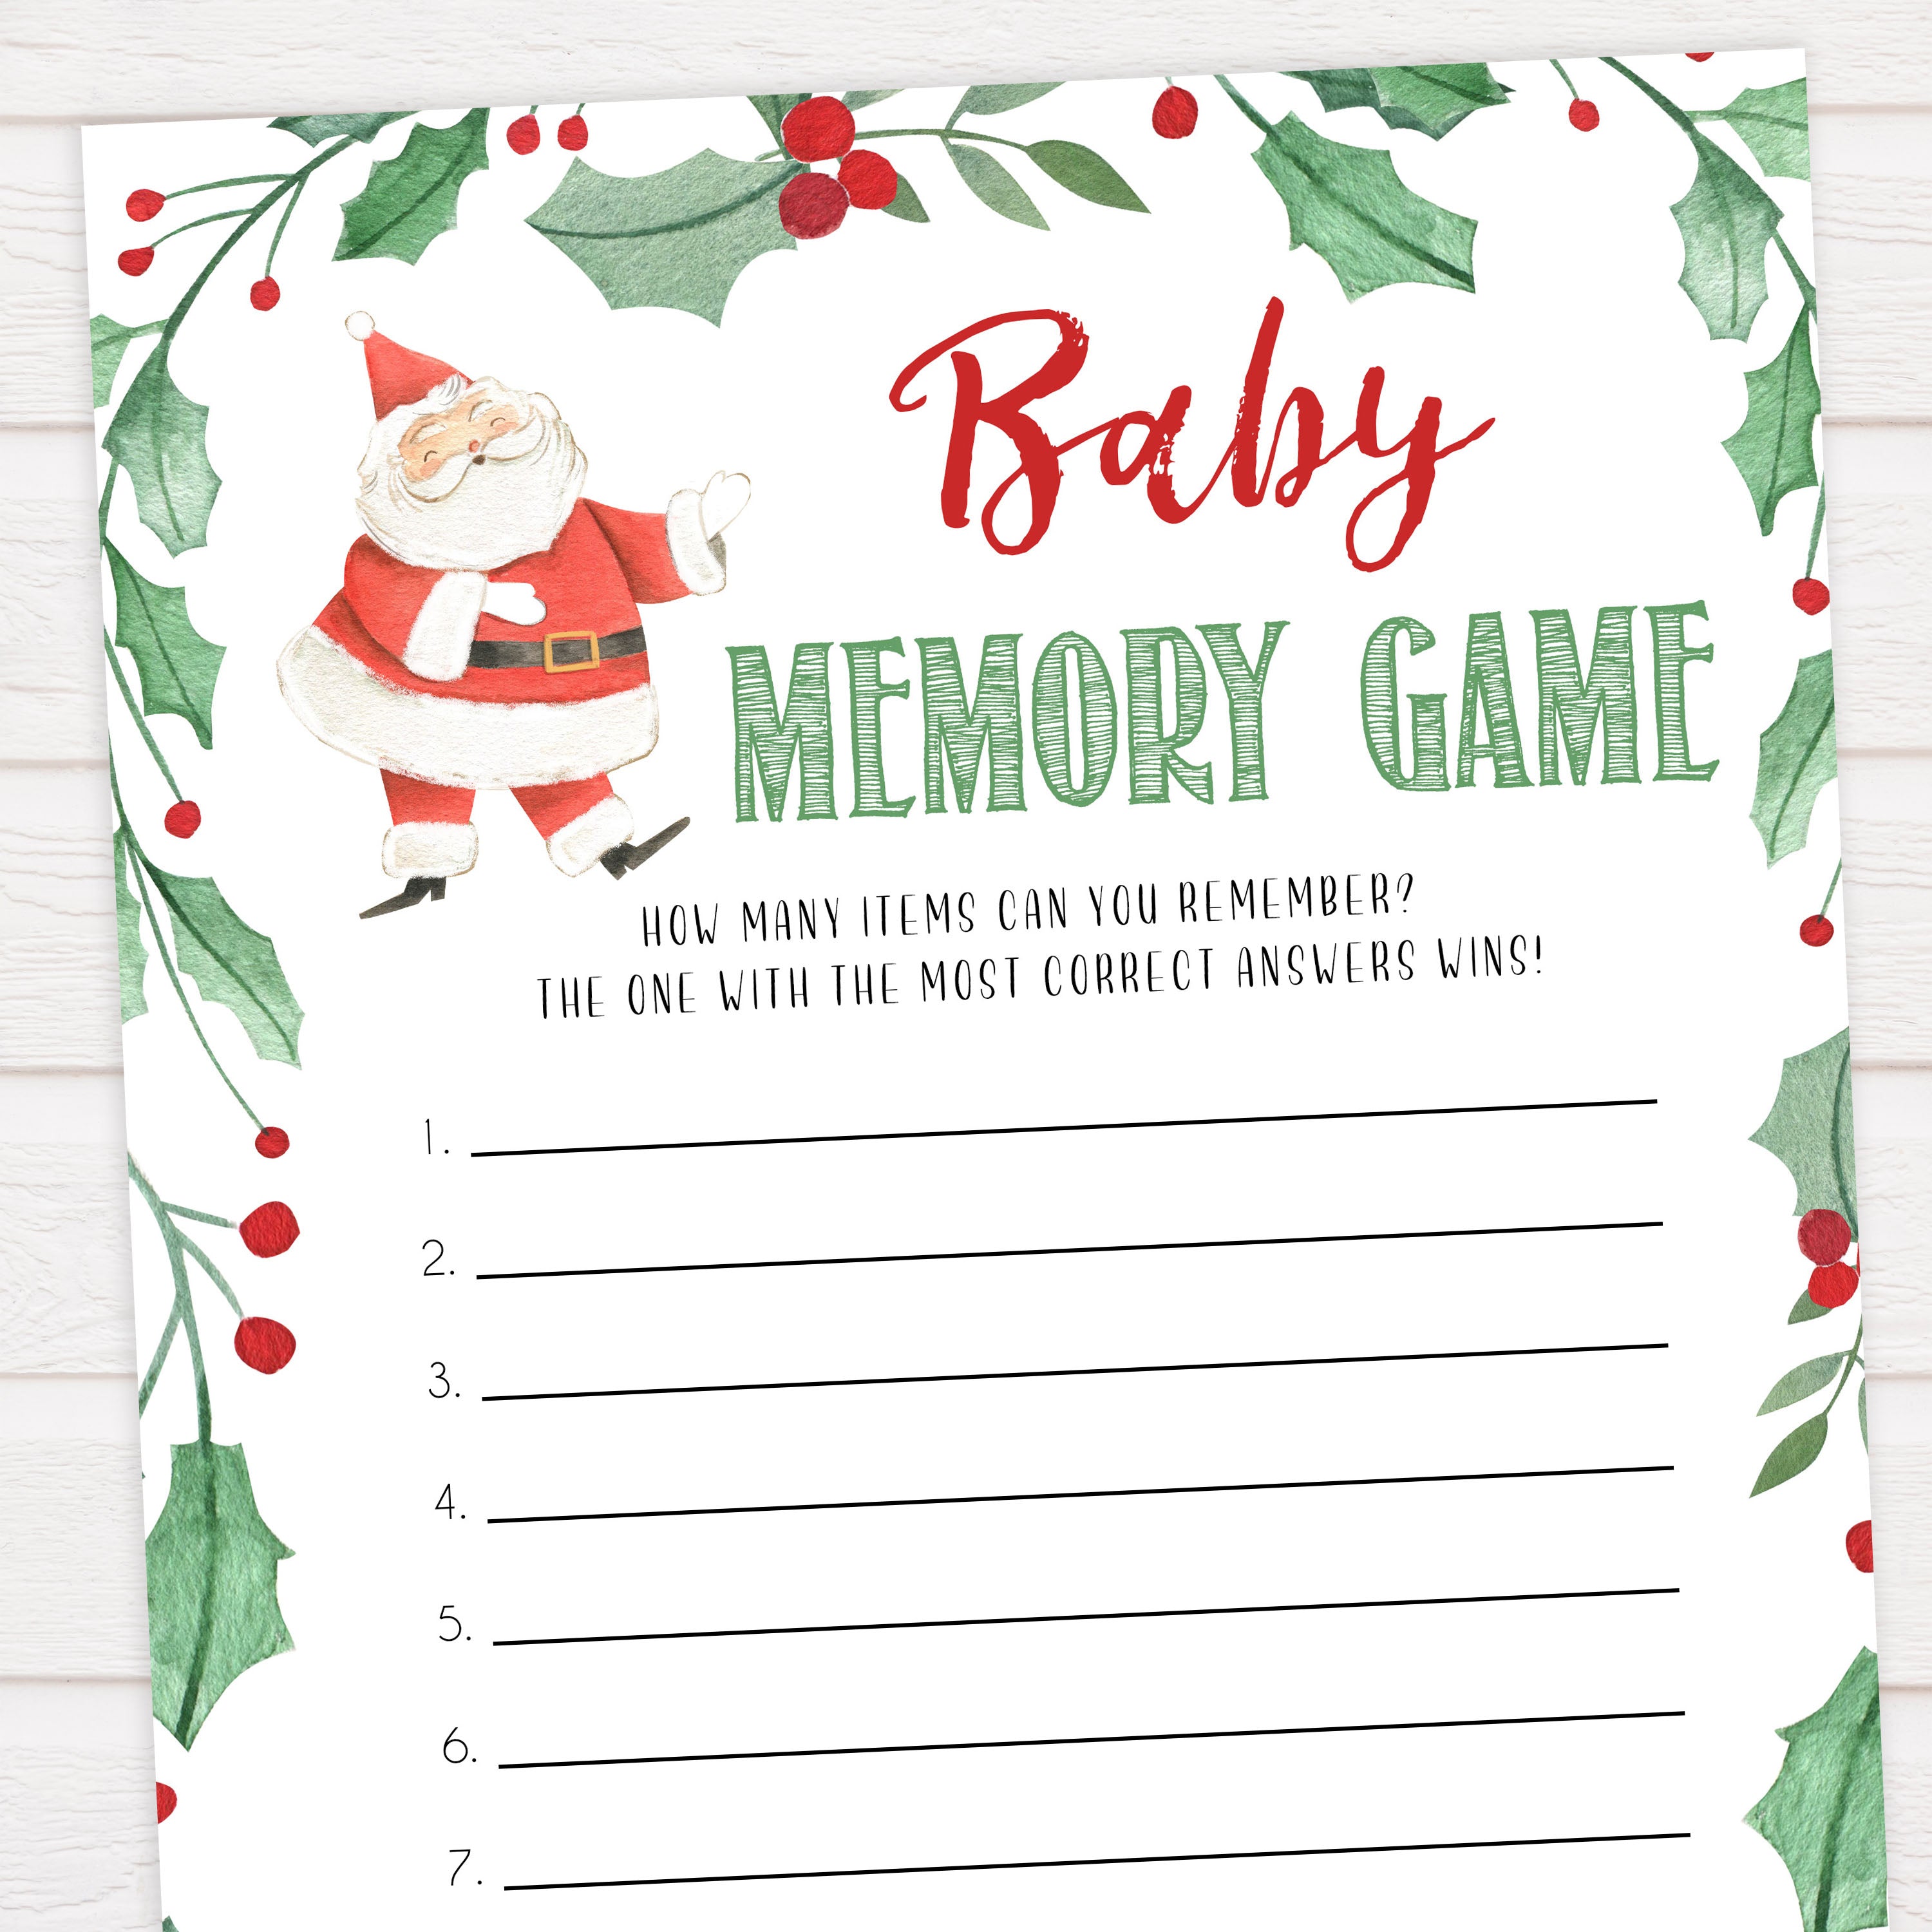 Christmas baby shower games, baby memory game, festive baby shower games, best baby shower games, top 10 baby games, baby shower ideas, baby shower games